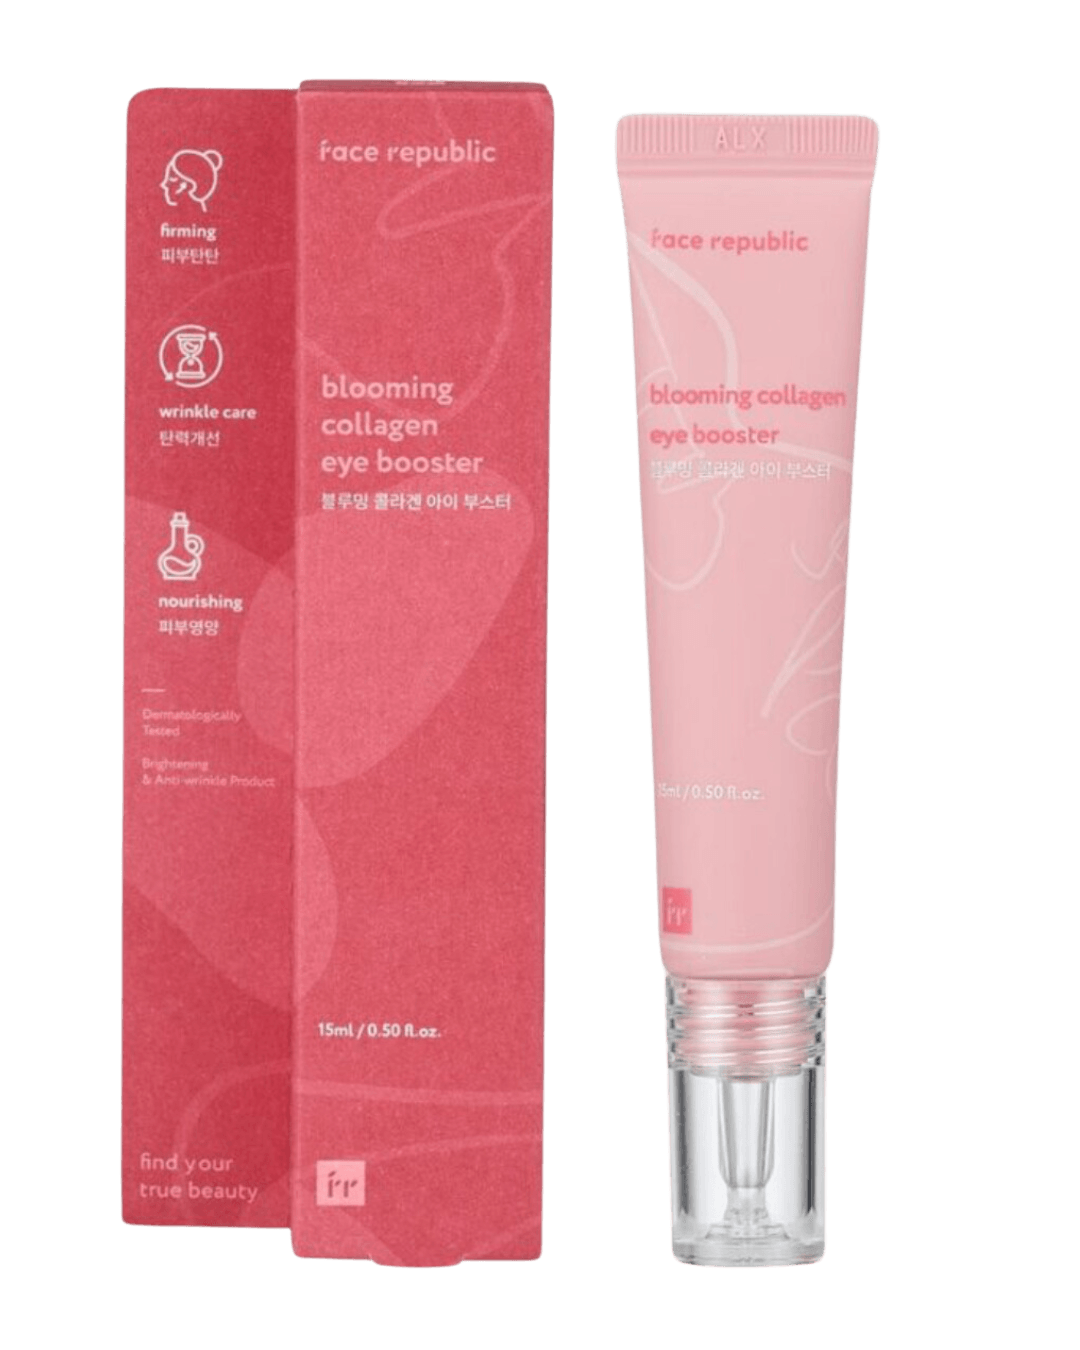 Daily Vanity Beauty Awards 2024 Best Skincare Face Republic Blooming Collagen Eye Booster Voted By Beauty Experts